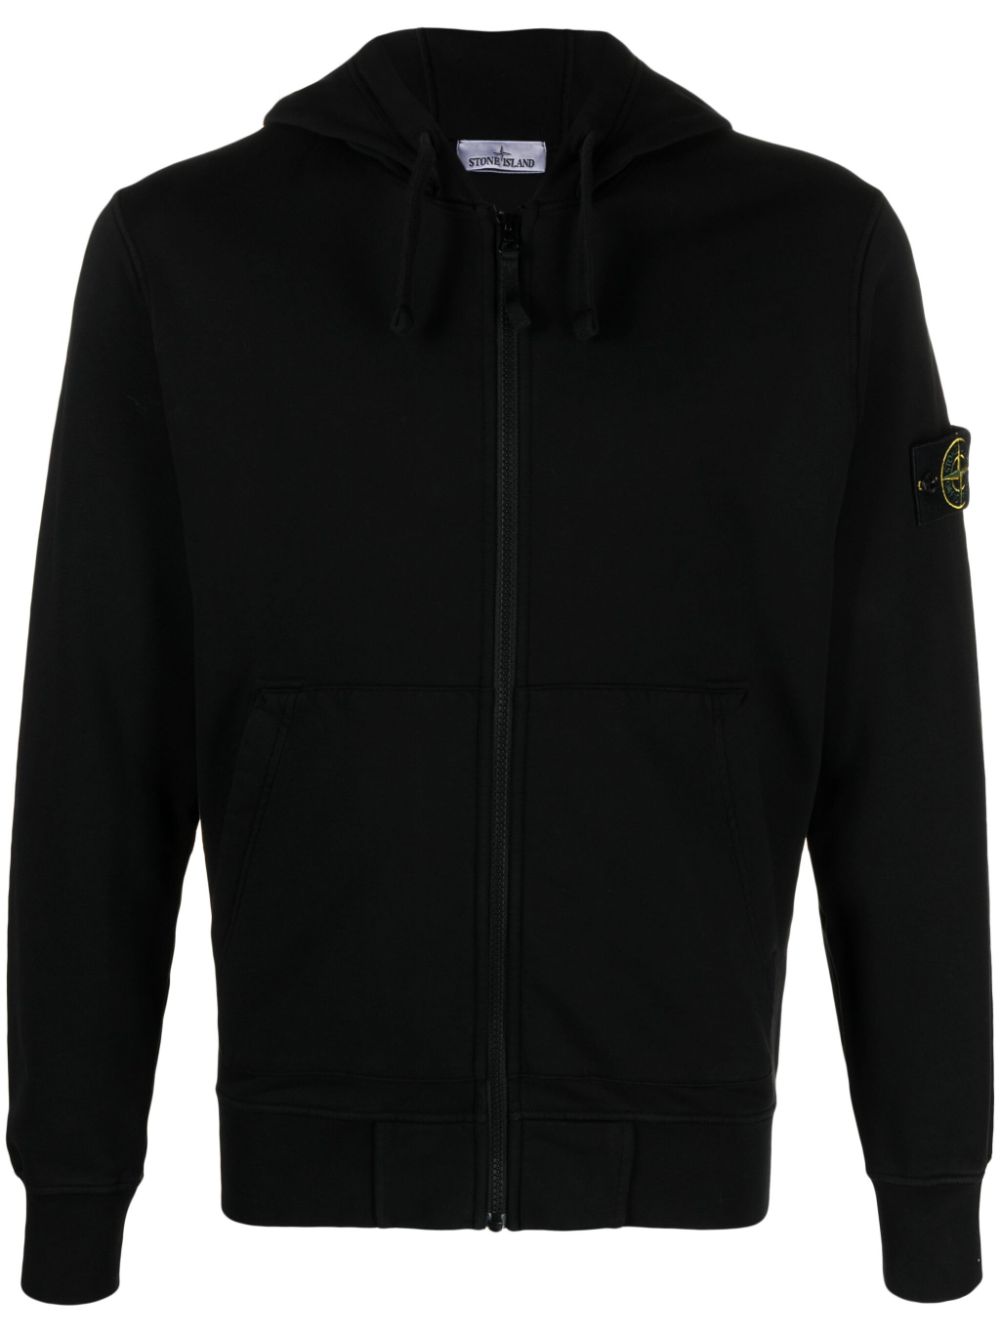 Stone Island Compass-badge knitted hoodie - Blue